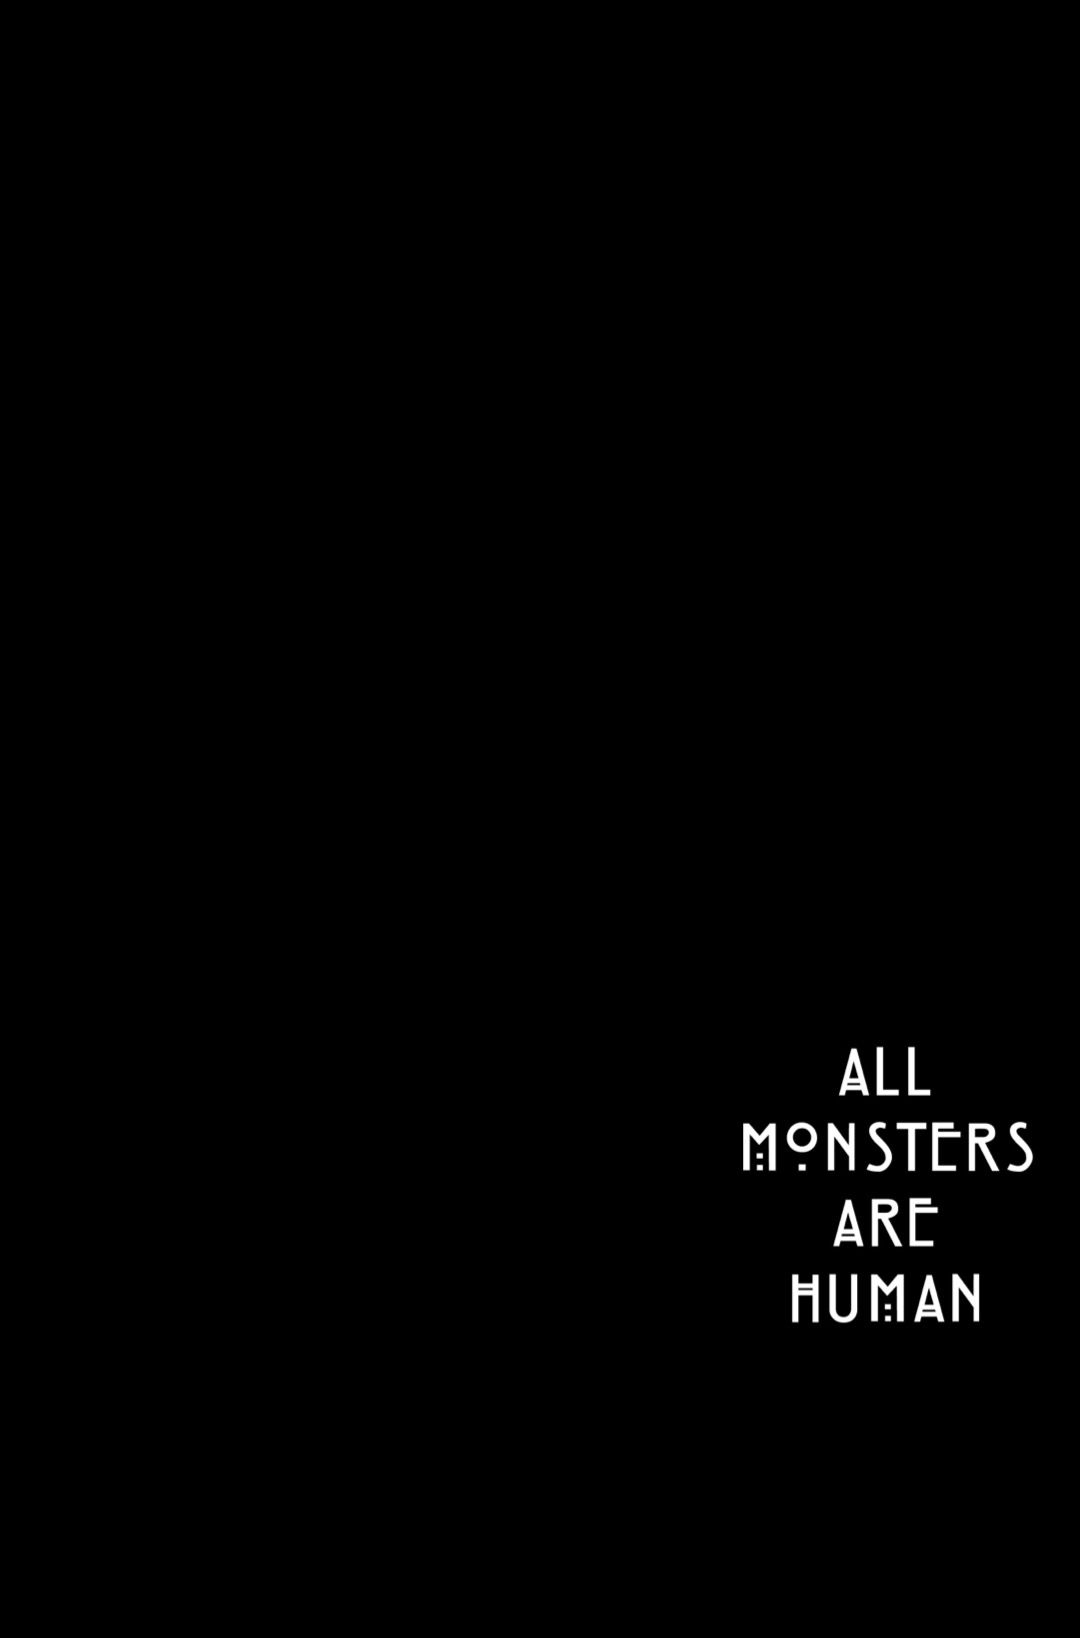 All monsters are human. Black wallpaper iphone dark, Black aesthetic wallpaper, Black wallpaper iphone